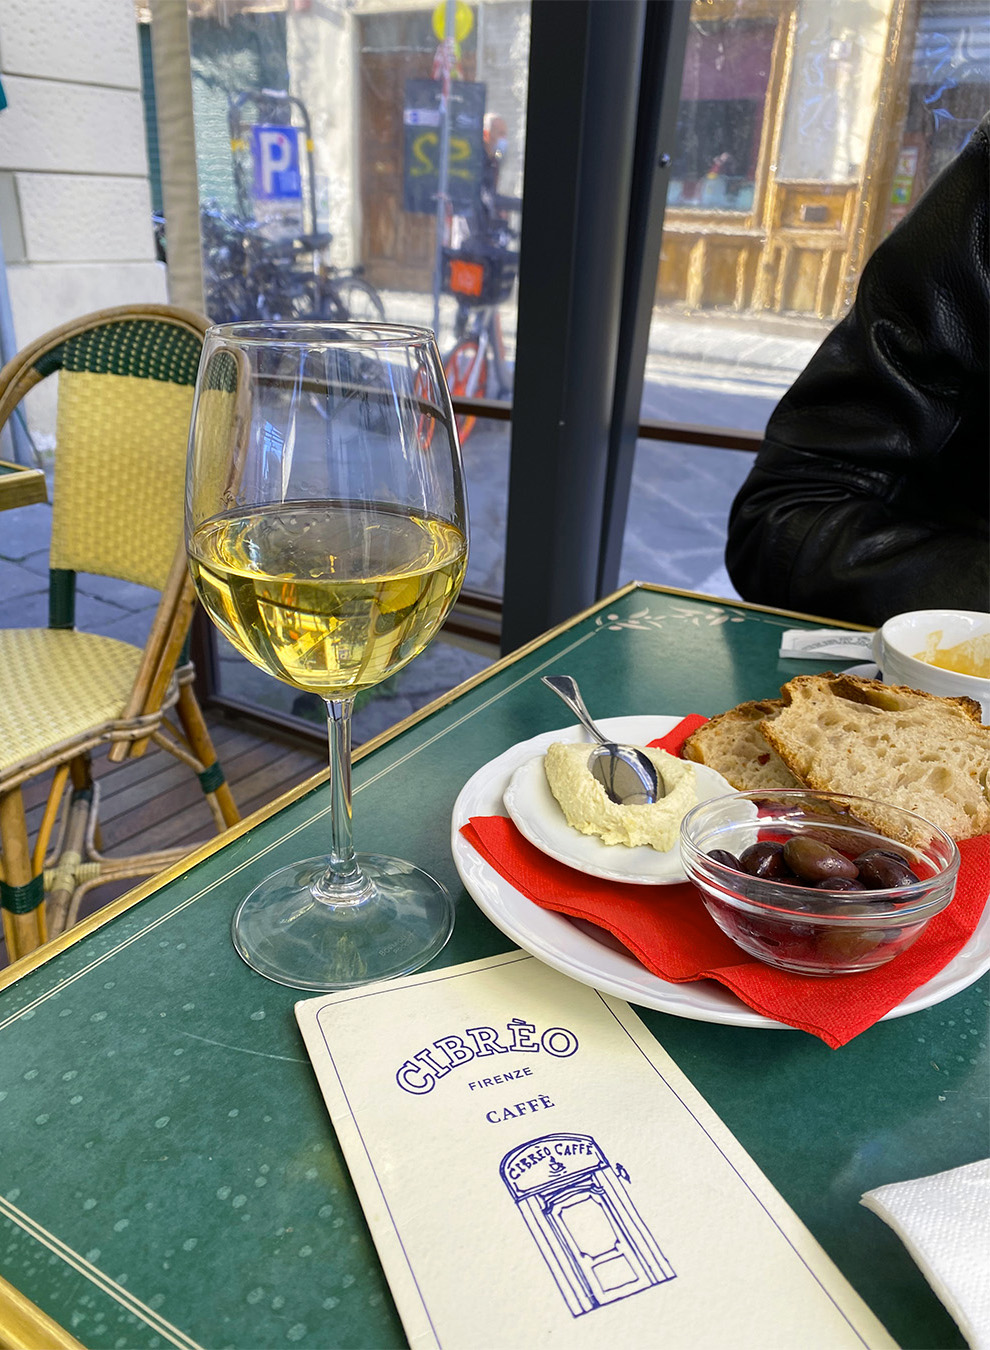 Appetizers being served at Cibrèo Caffè in Florence